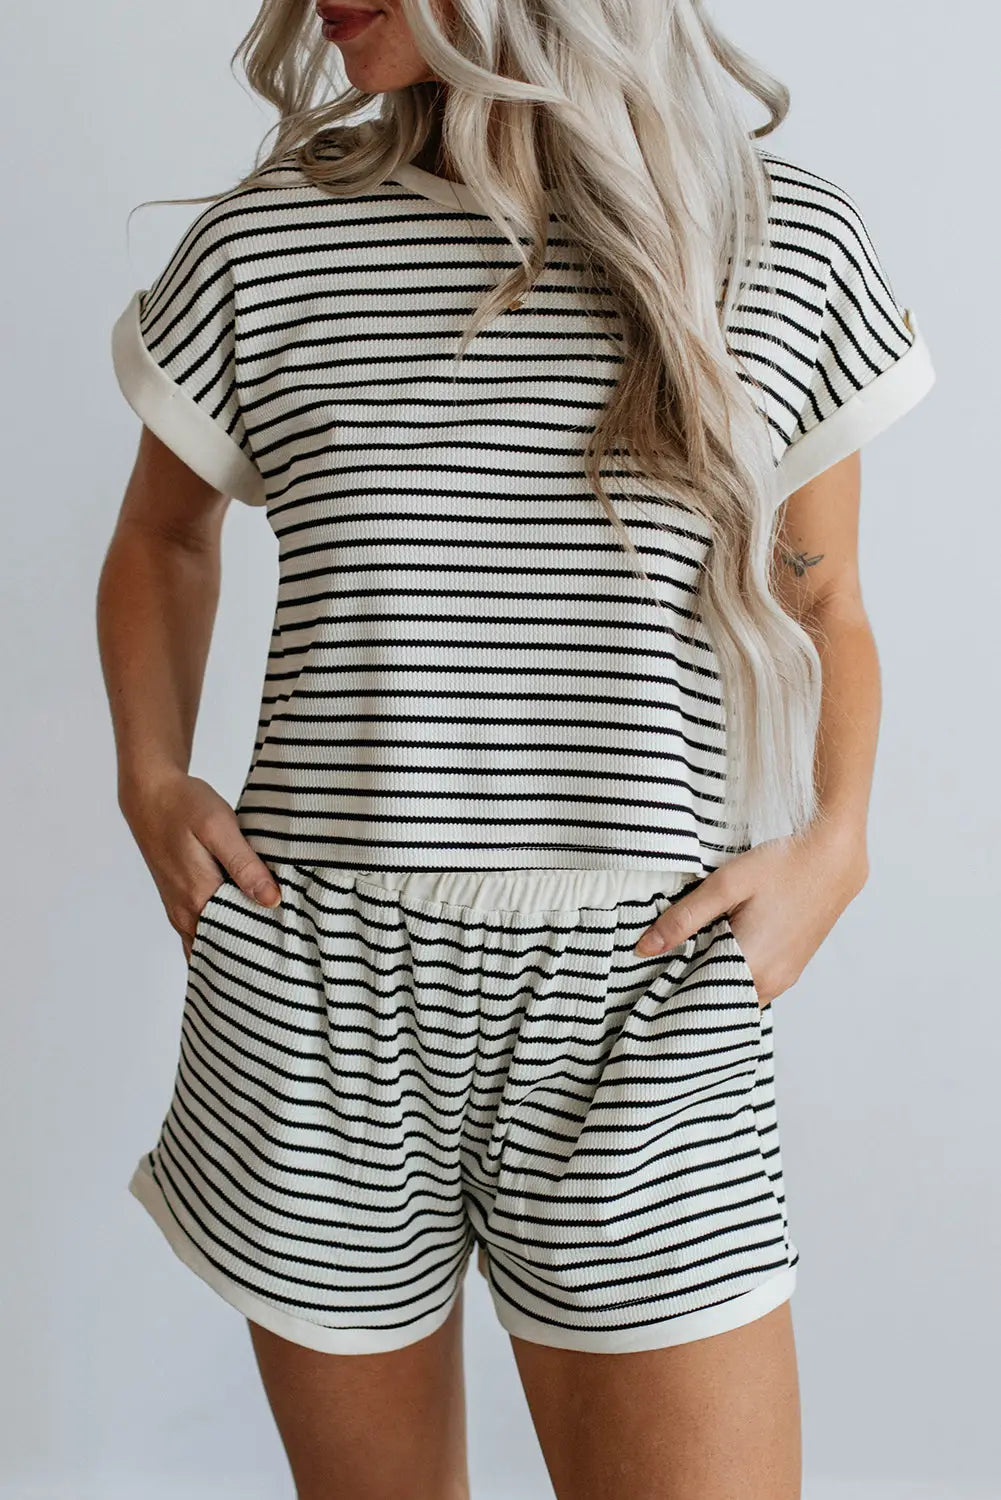 White stripe contrast edge tee and shorts set - s / 50% cotton + 47% polyester + 3% elastane - two piece sets/short sets